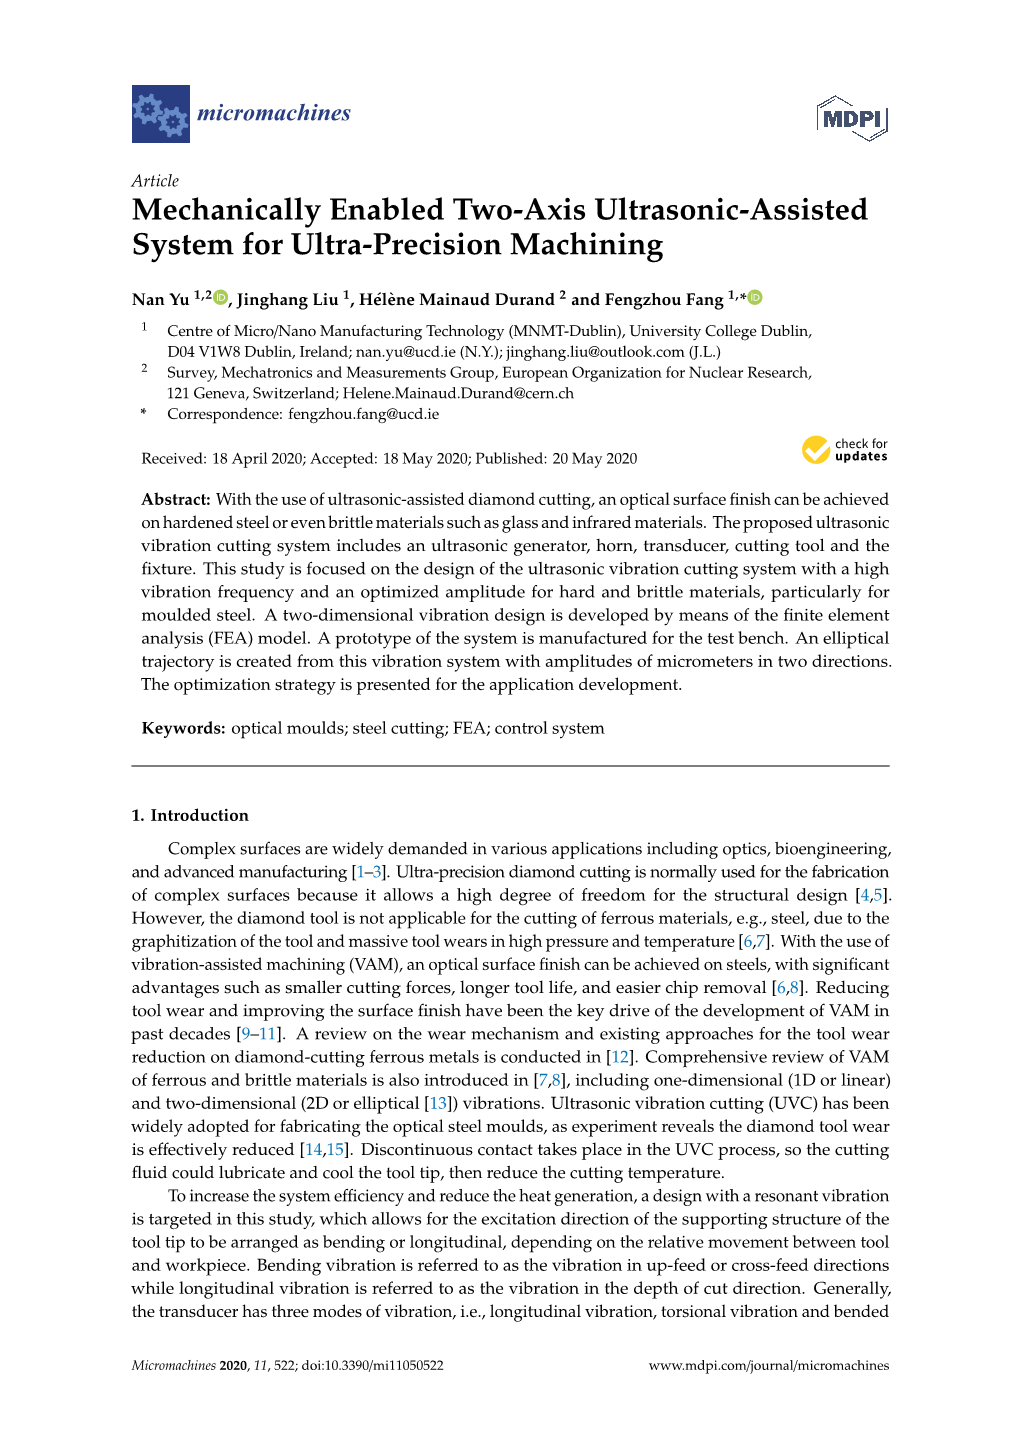 Mechanically Enabled Two-Axis Ultrasonic-Assisted System for Ultra-Precision Machining